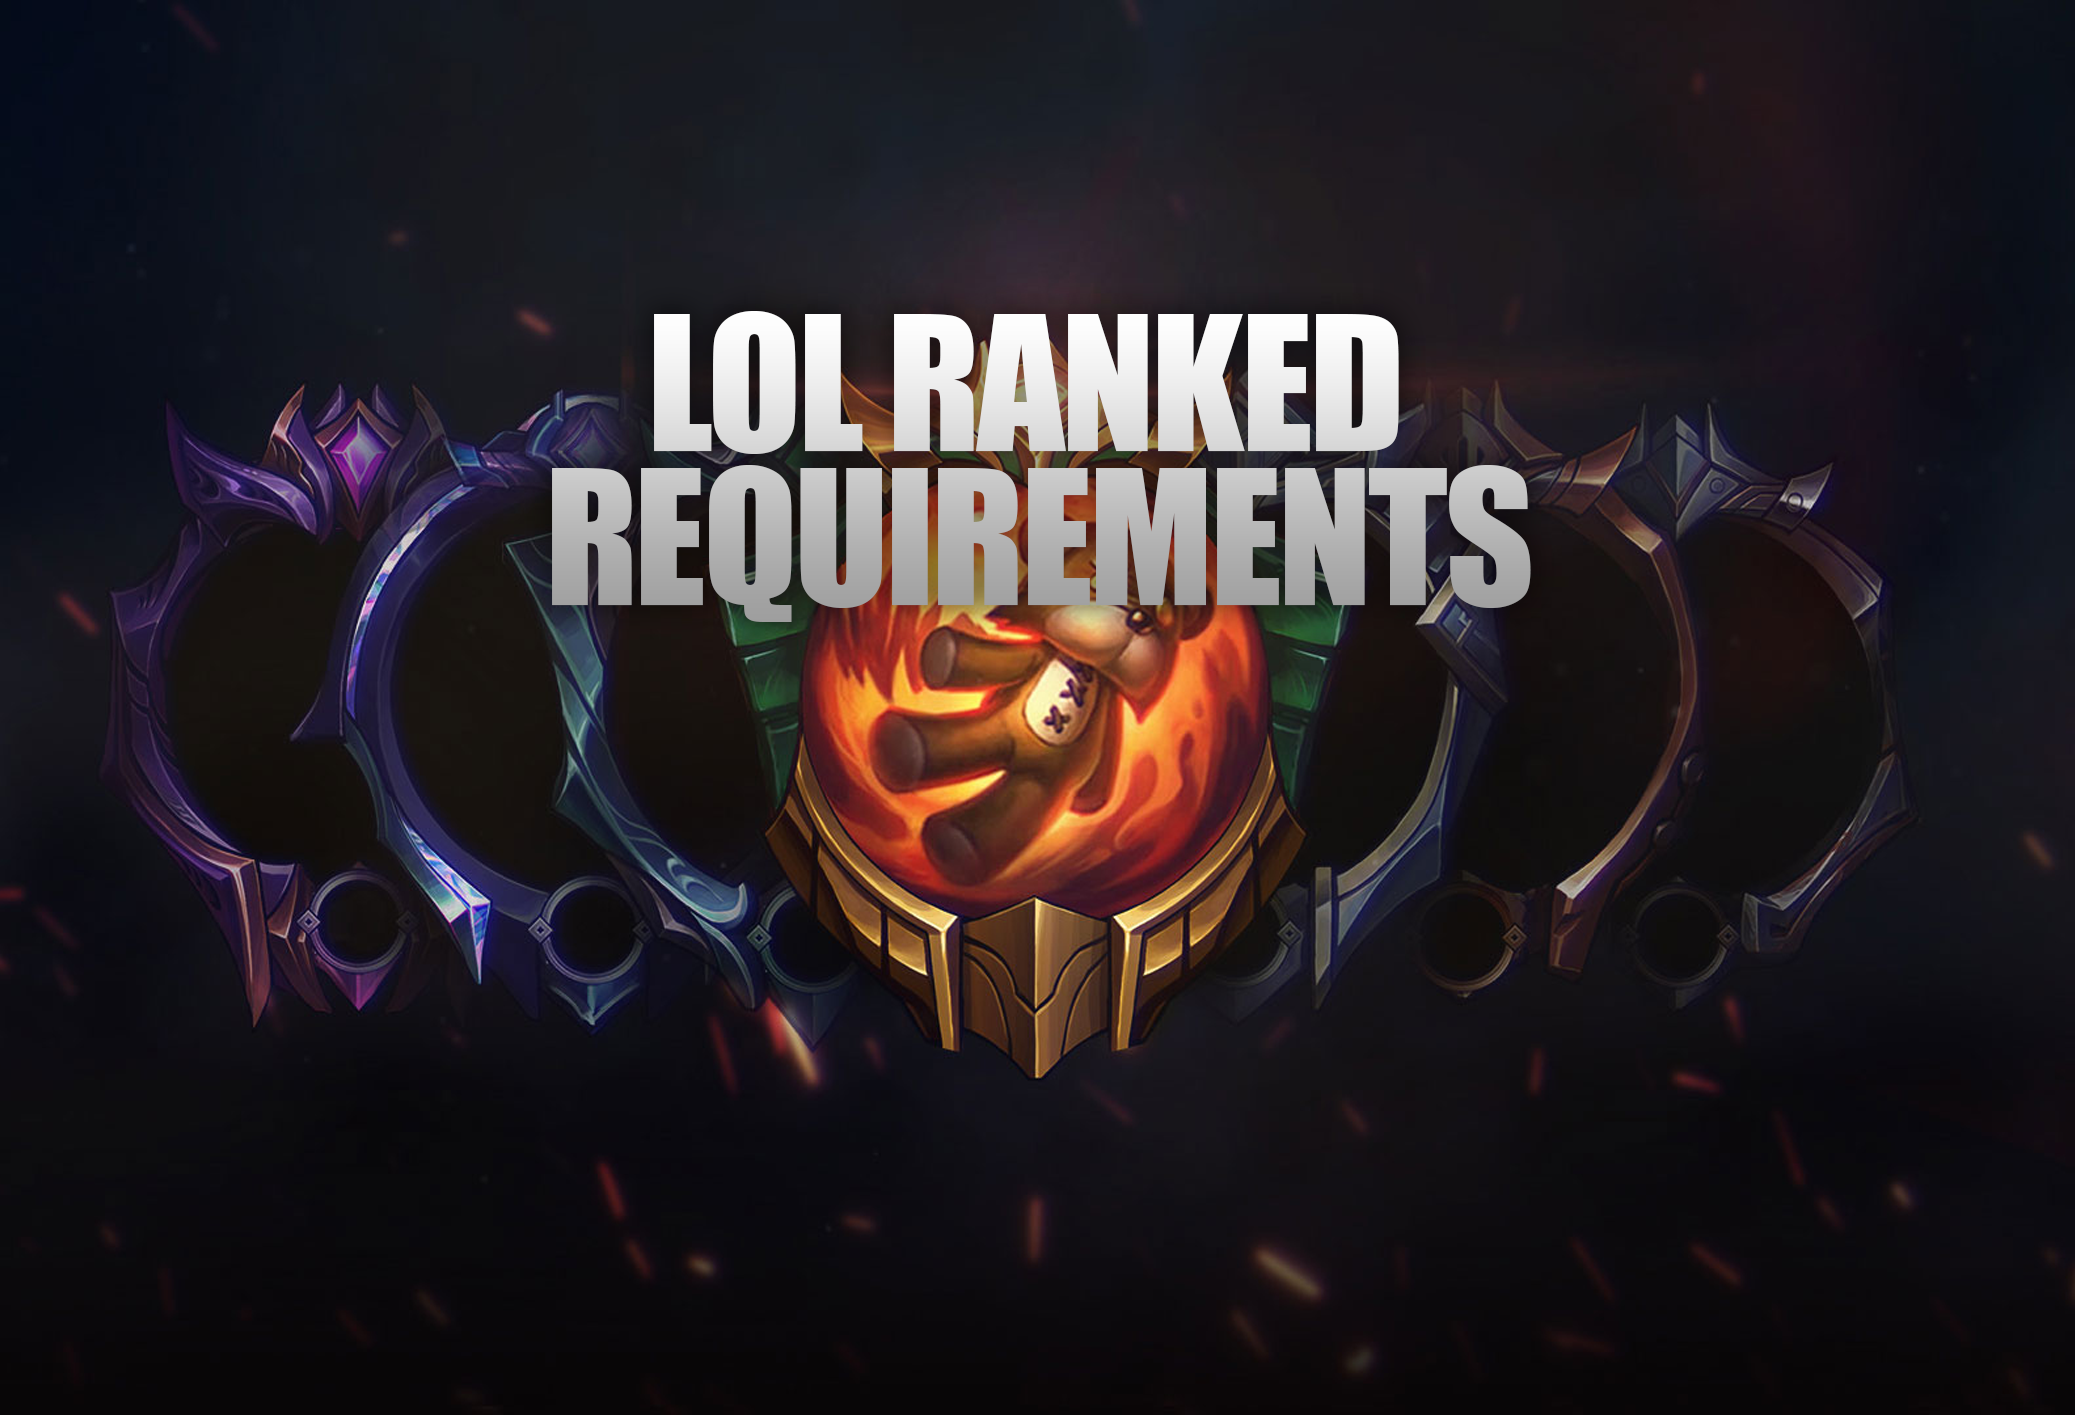 Before you can start playing ranked matches in League of Legends, there are a few requirements your account must meet